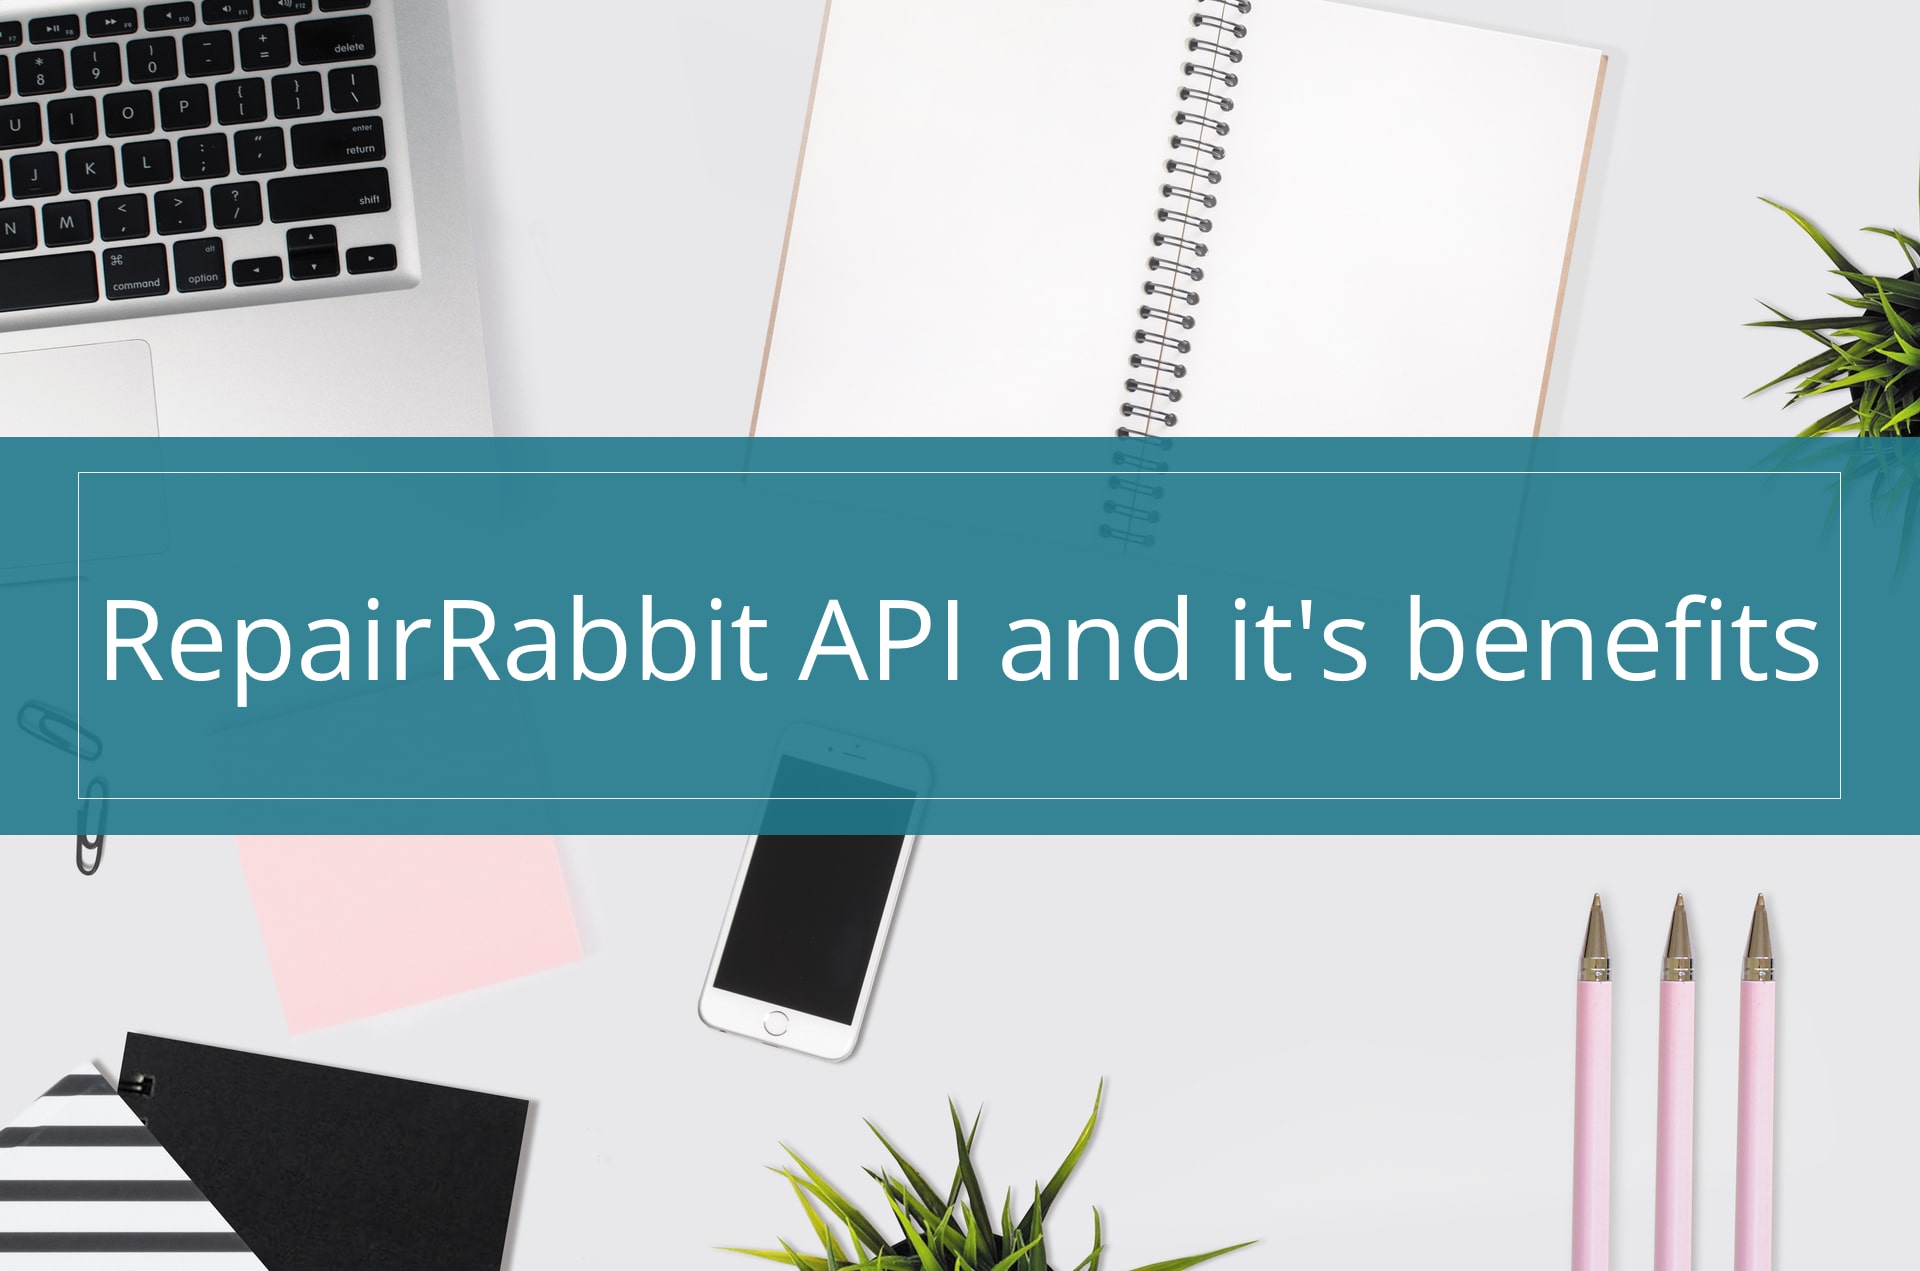 Everthing you need to know about RepairRabbit API